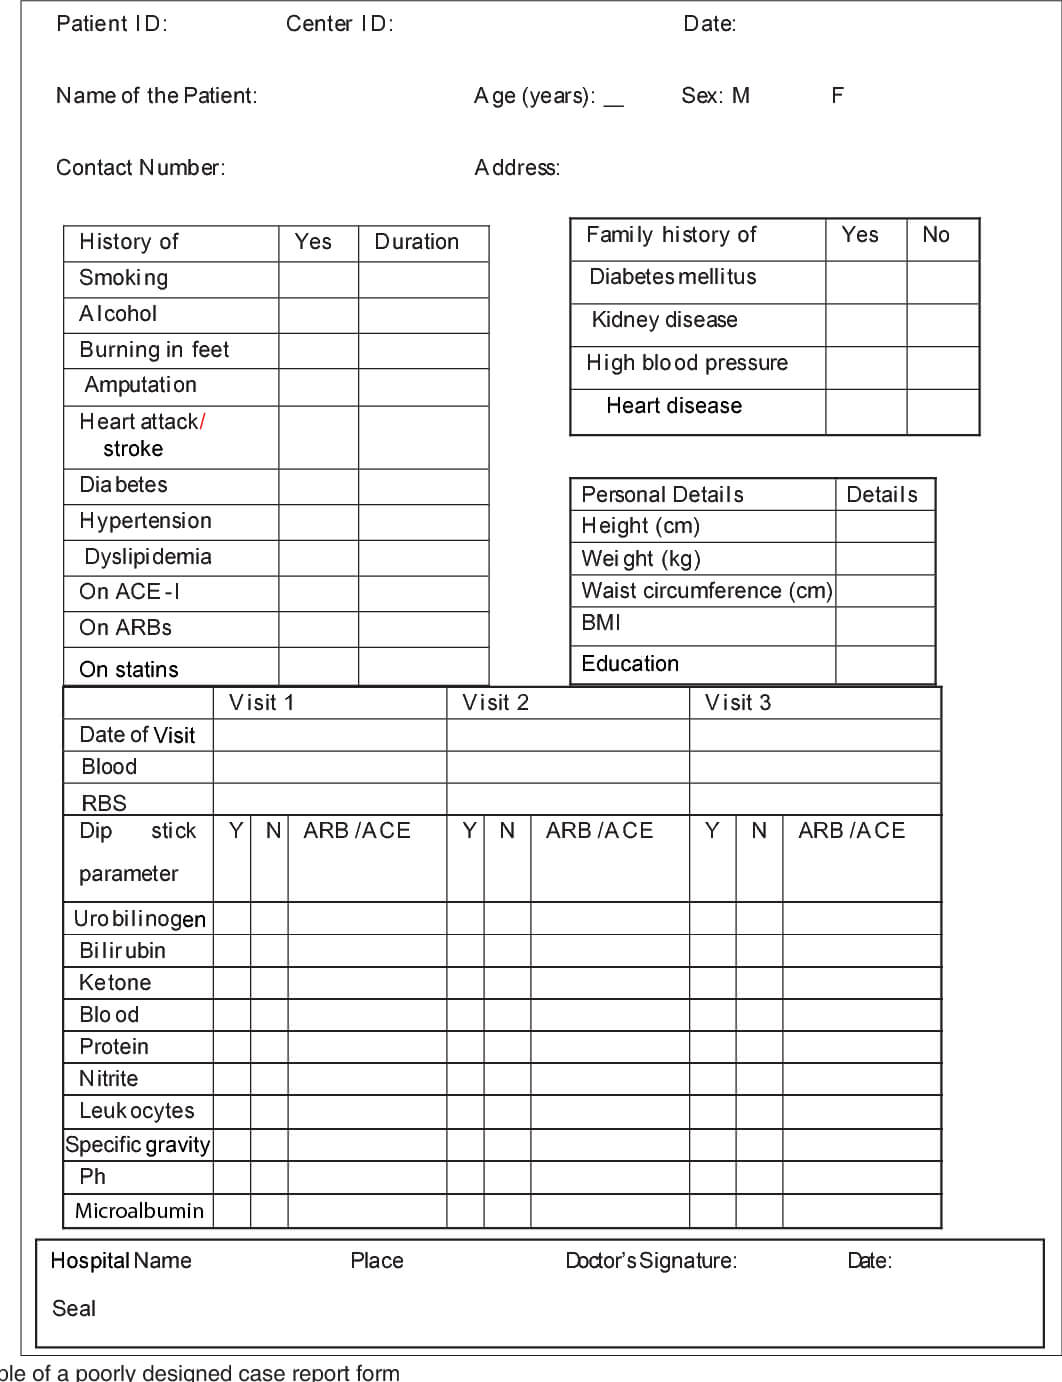 Basics Of Case Report Form Designing In Clinical Research Throughout Case Report Form Template